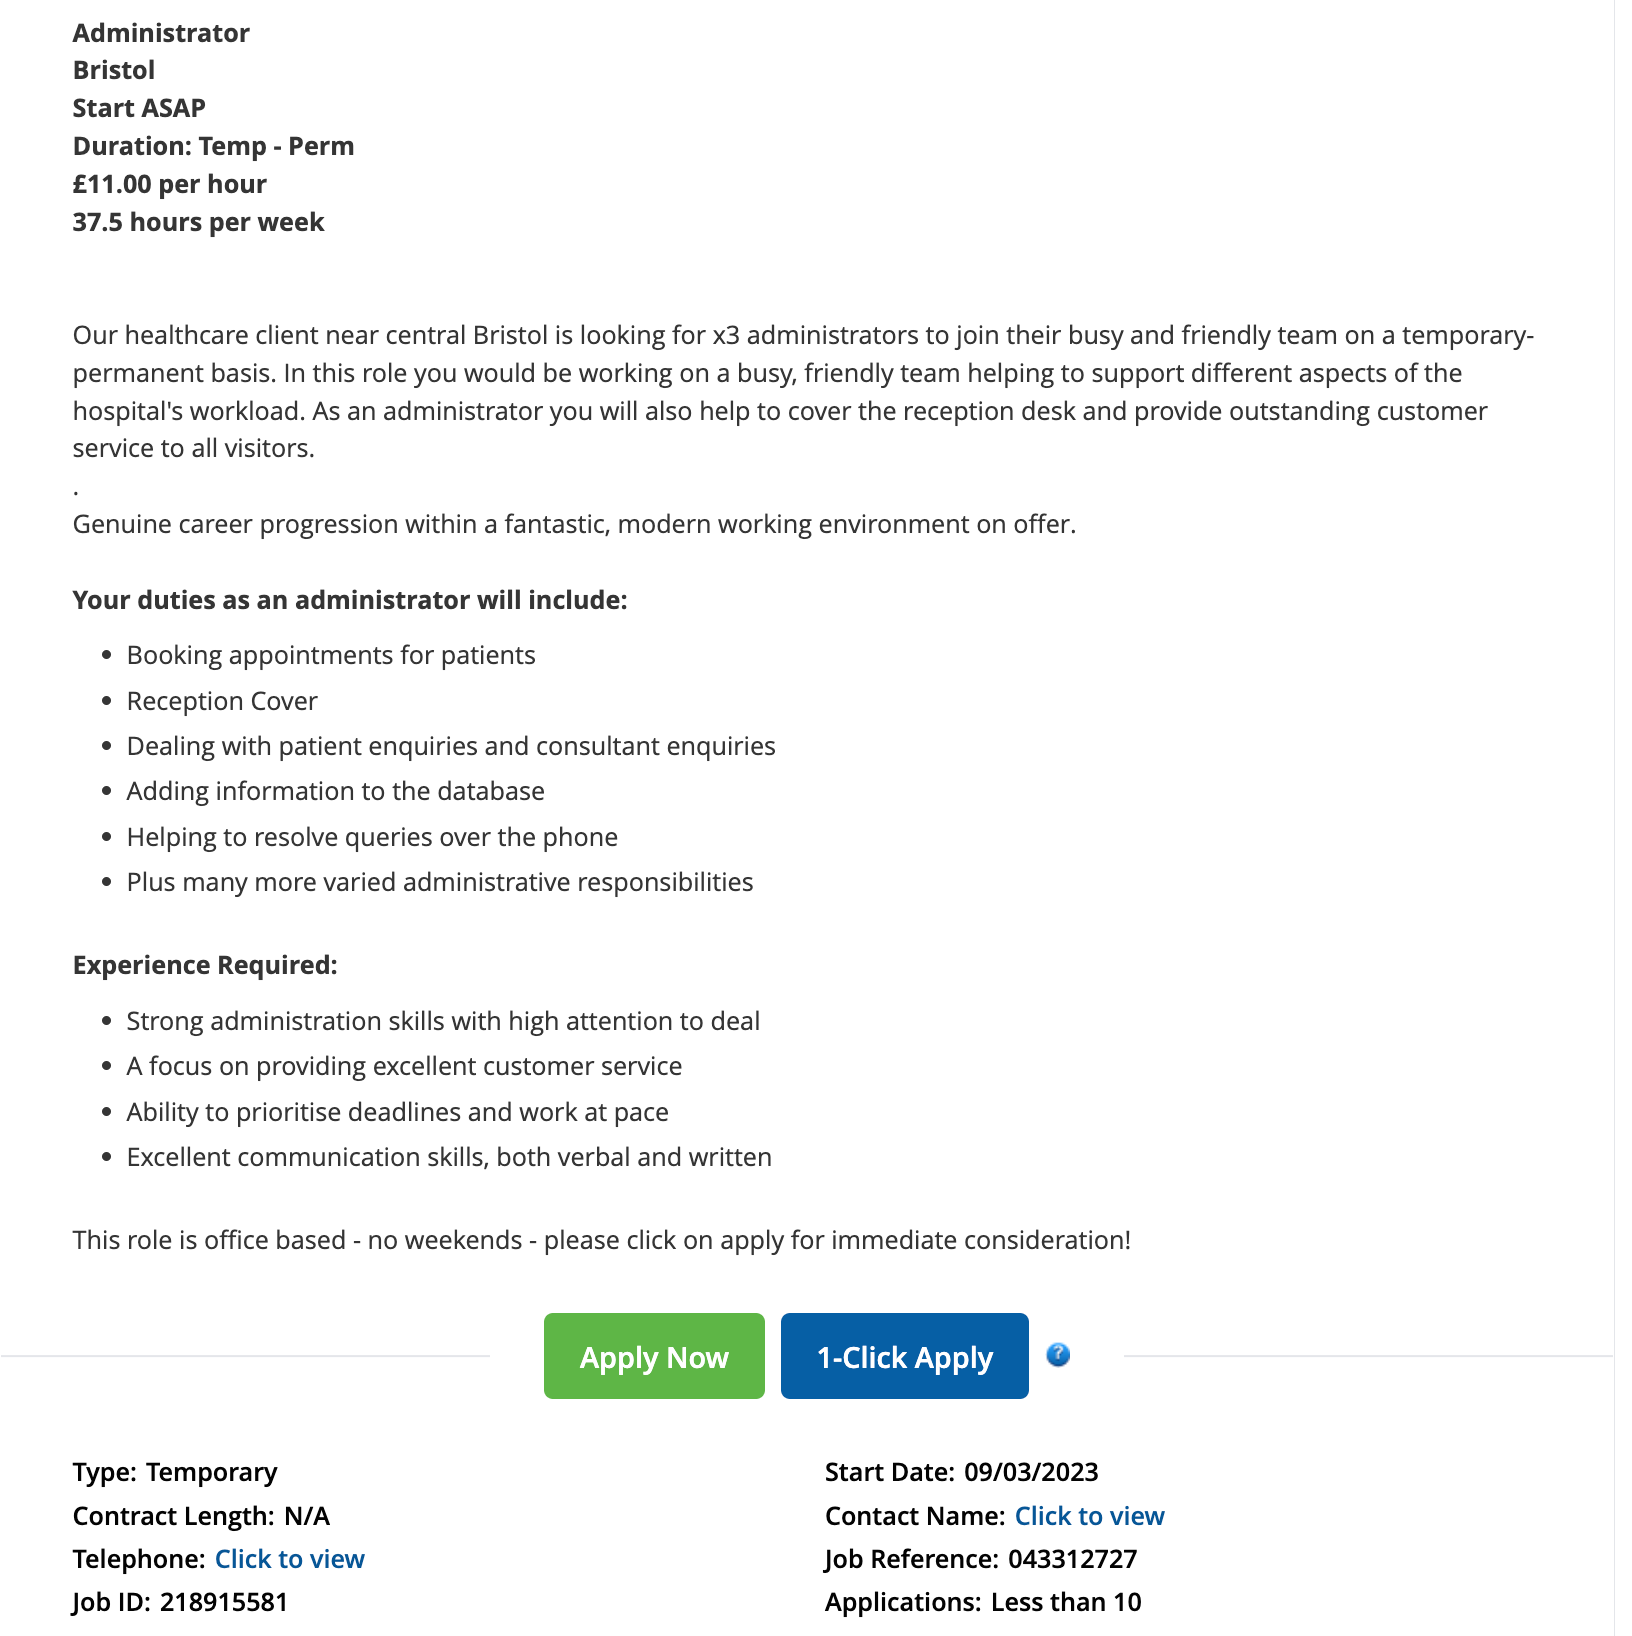 An example job advert from CV Library.